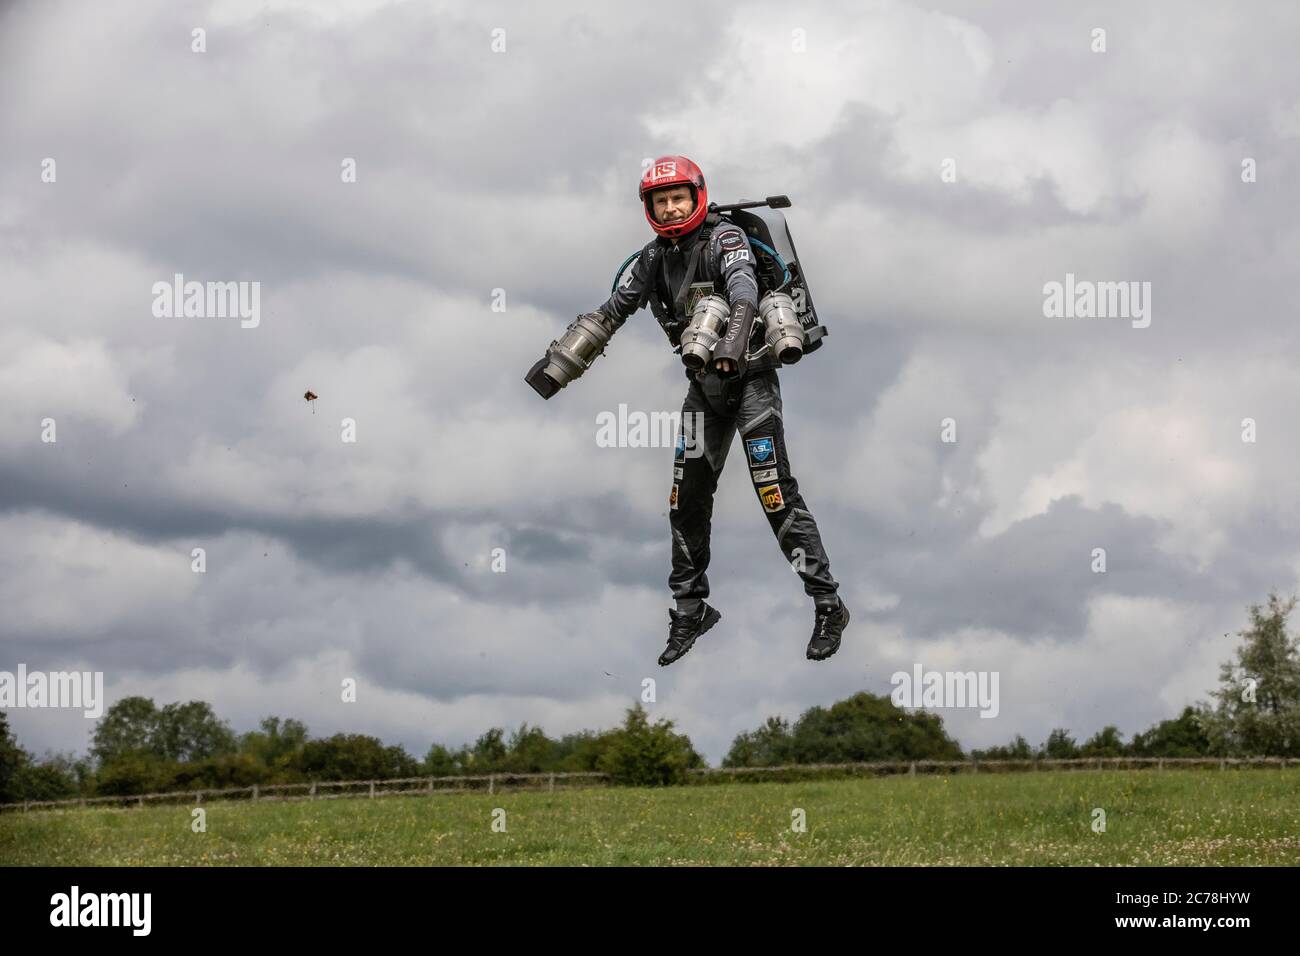 Richard Browning in his jetpack drops in the village of Binley in North Wessex Downs part of a display for Air Sports Group experience day, Andover UK Stock Photo